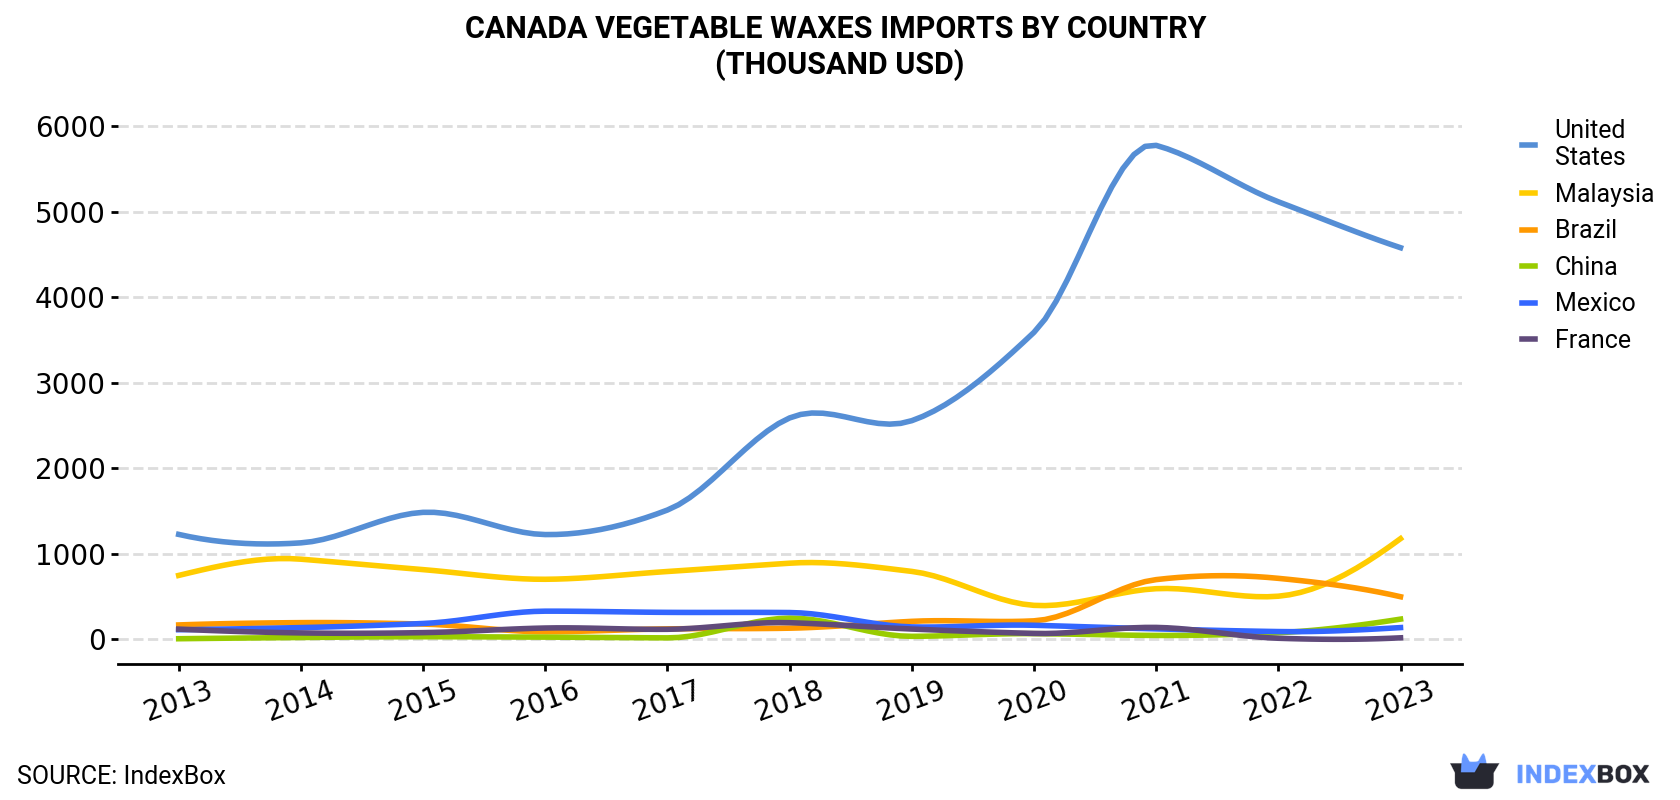 Canada Vegetable Waxes Imports By Country (Thousand USD)